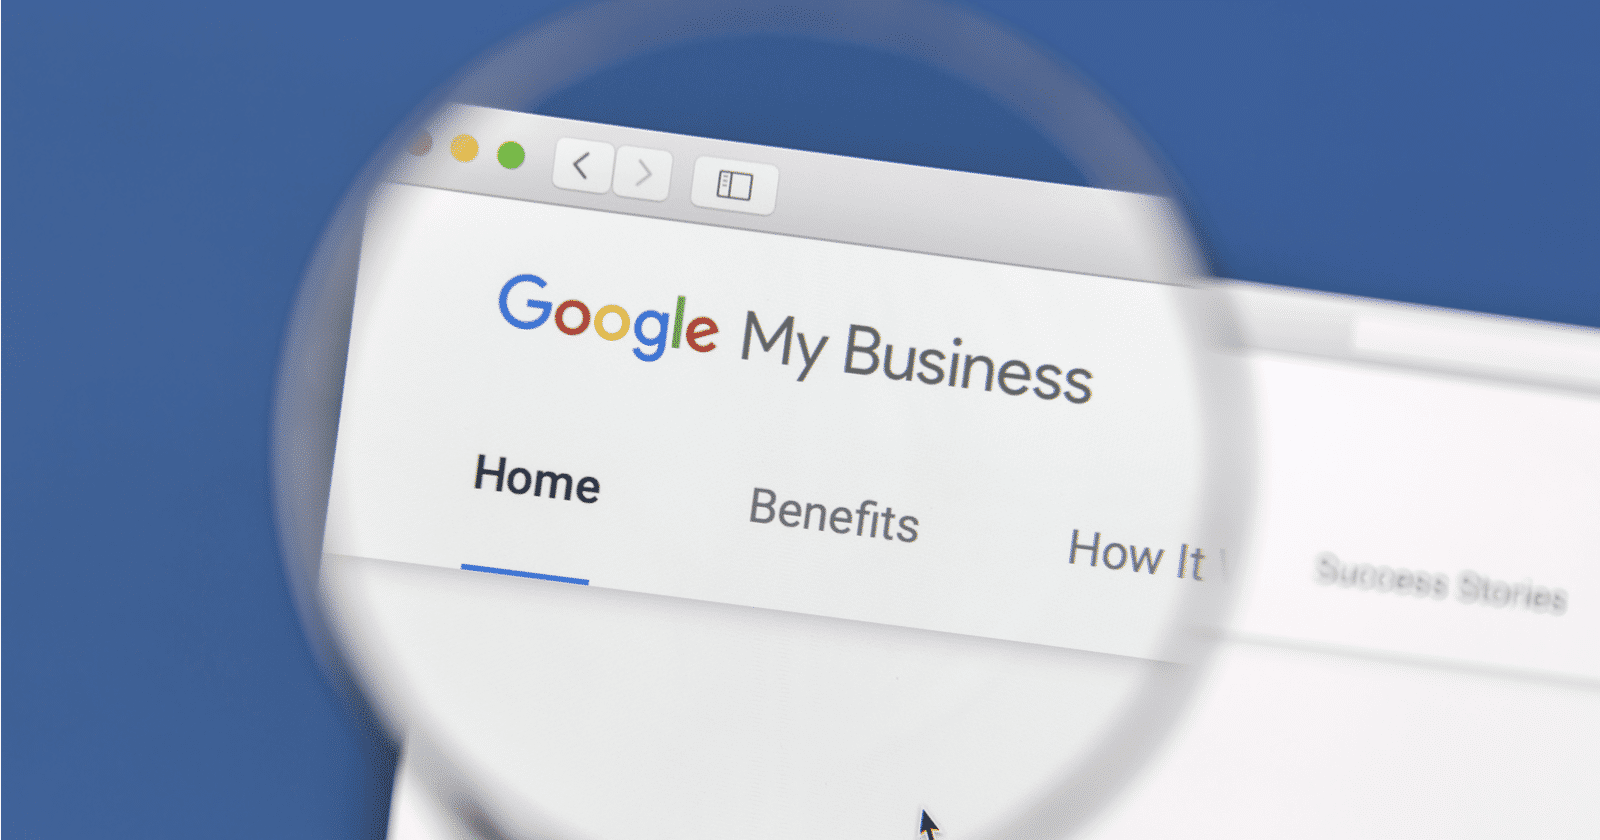  How to Optimize My Google My Business Listing